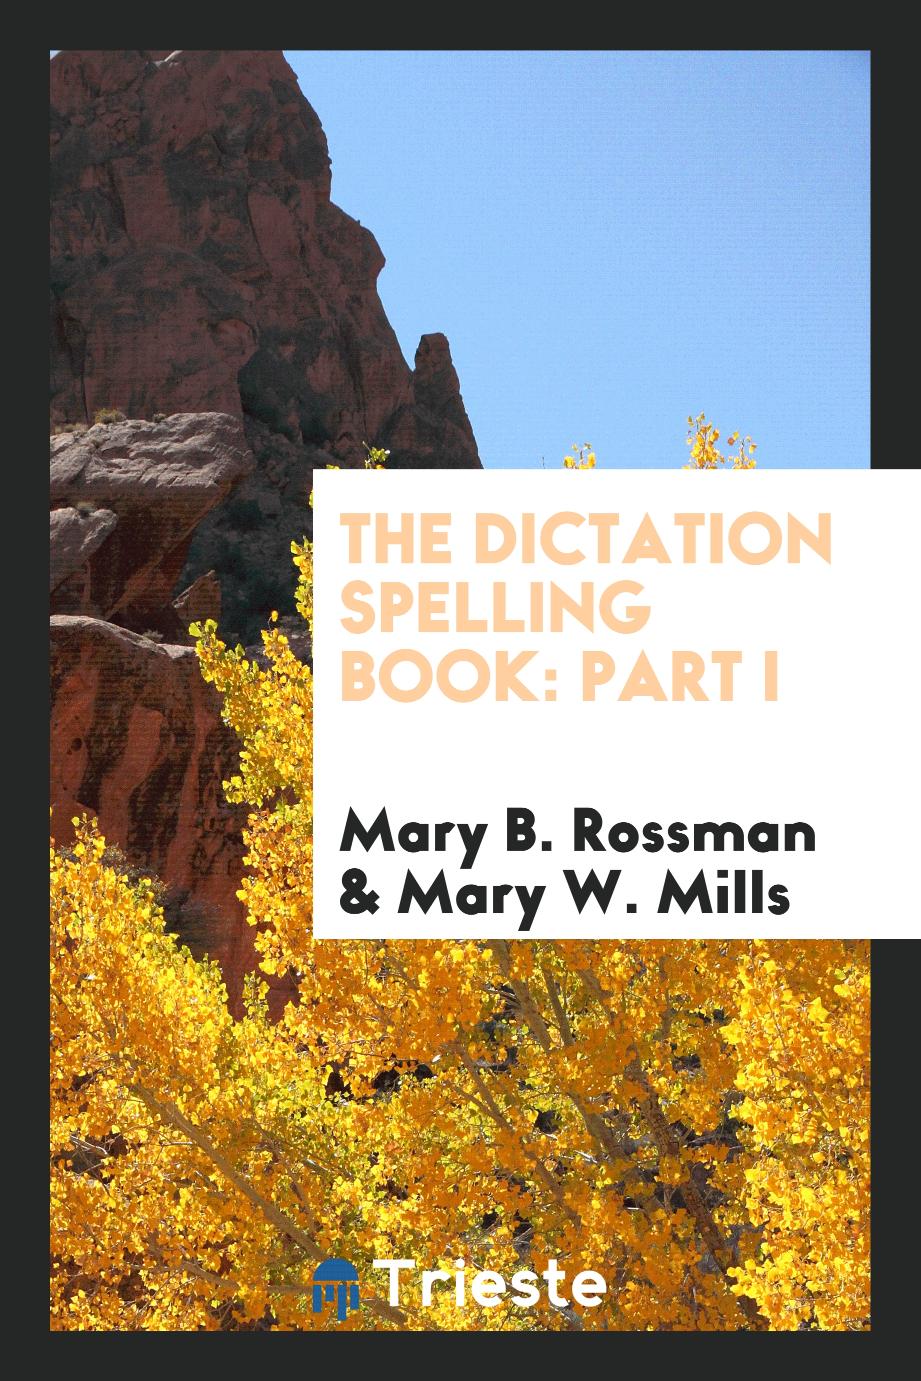 The Dictation Spelling Book: Part I